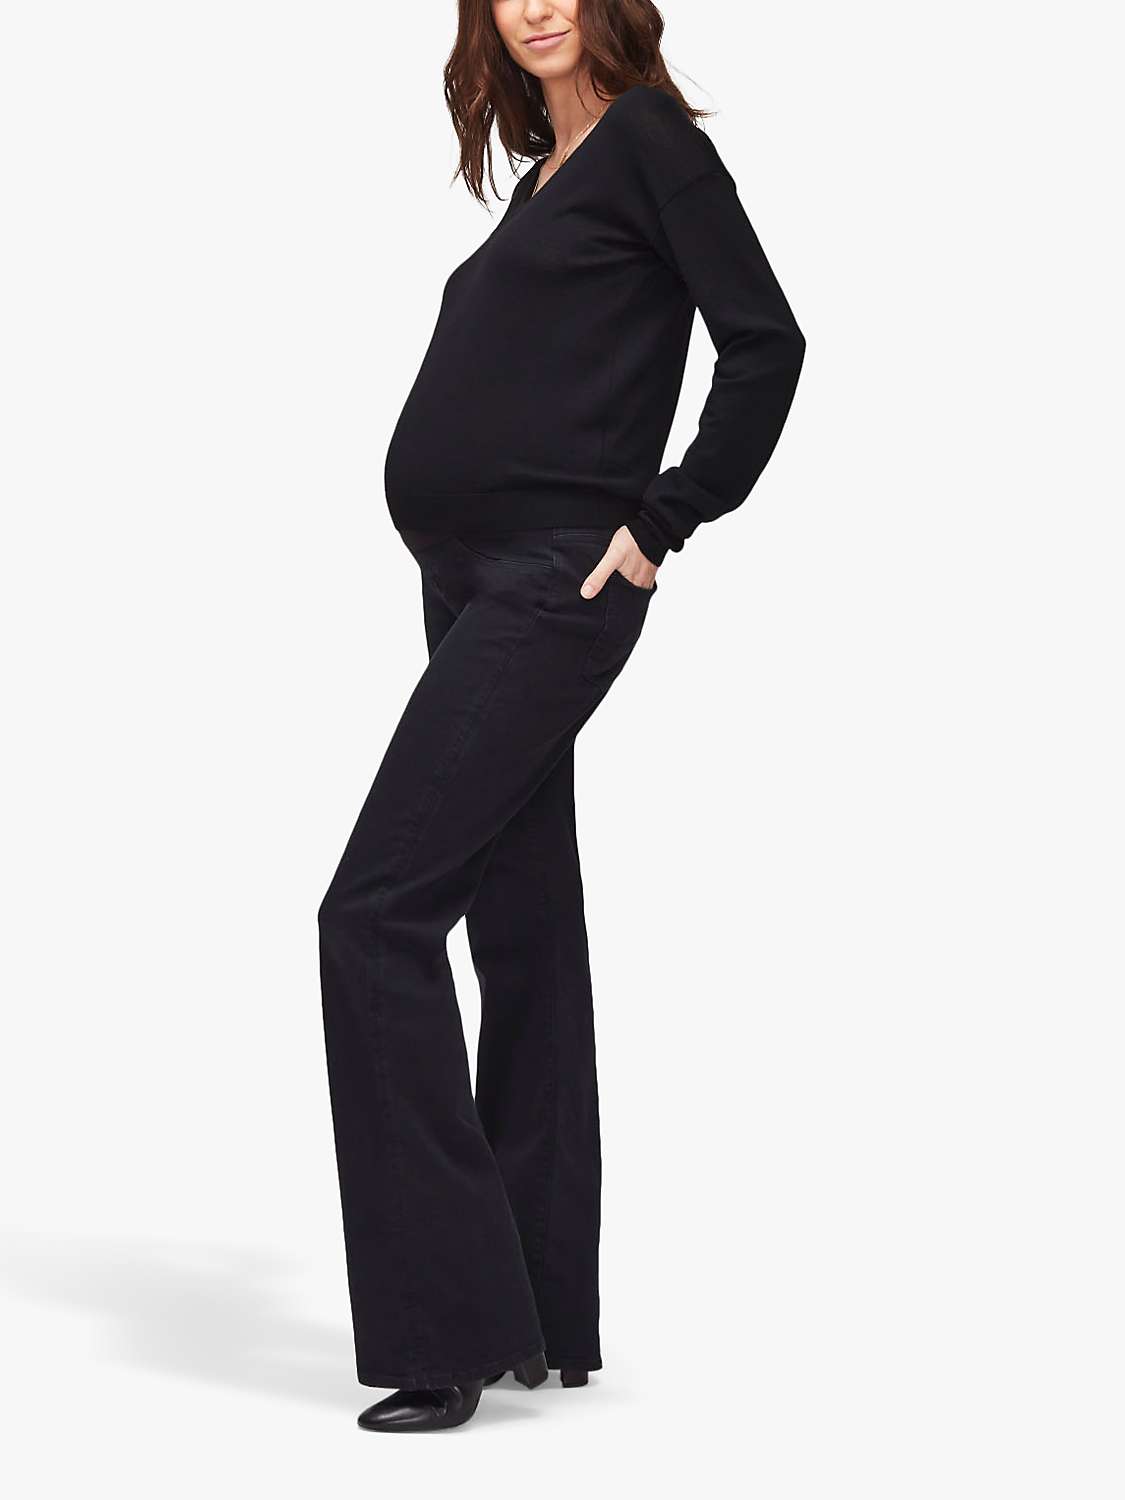 Buy 7 For All Mankind Bootcut Maternity Jeans Online at johnlewis.com